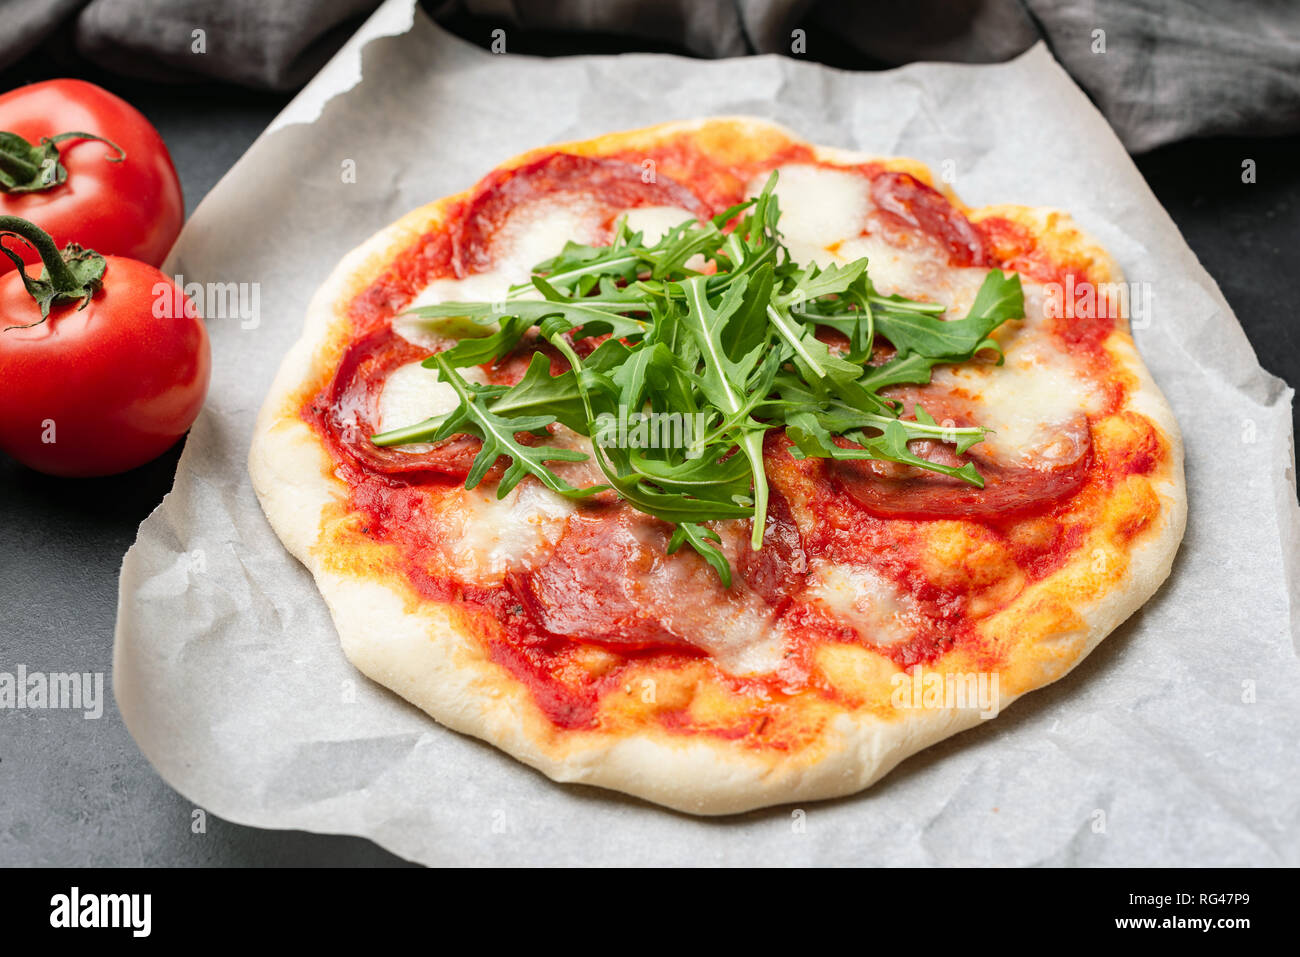 Tasty Pizza With Salami, Tomato Sauce, Cheese and Arugula. Selective focus Stock Photo